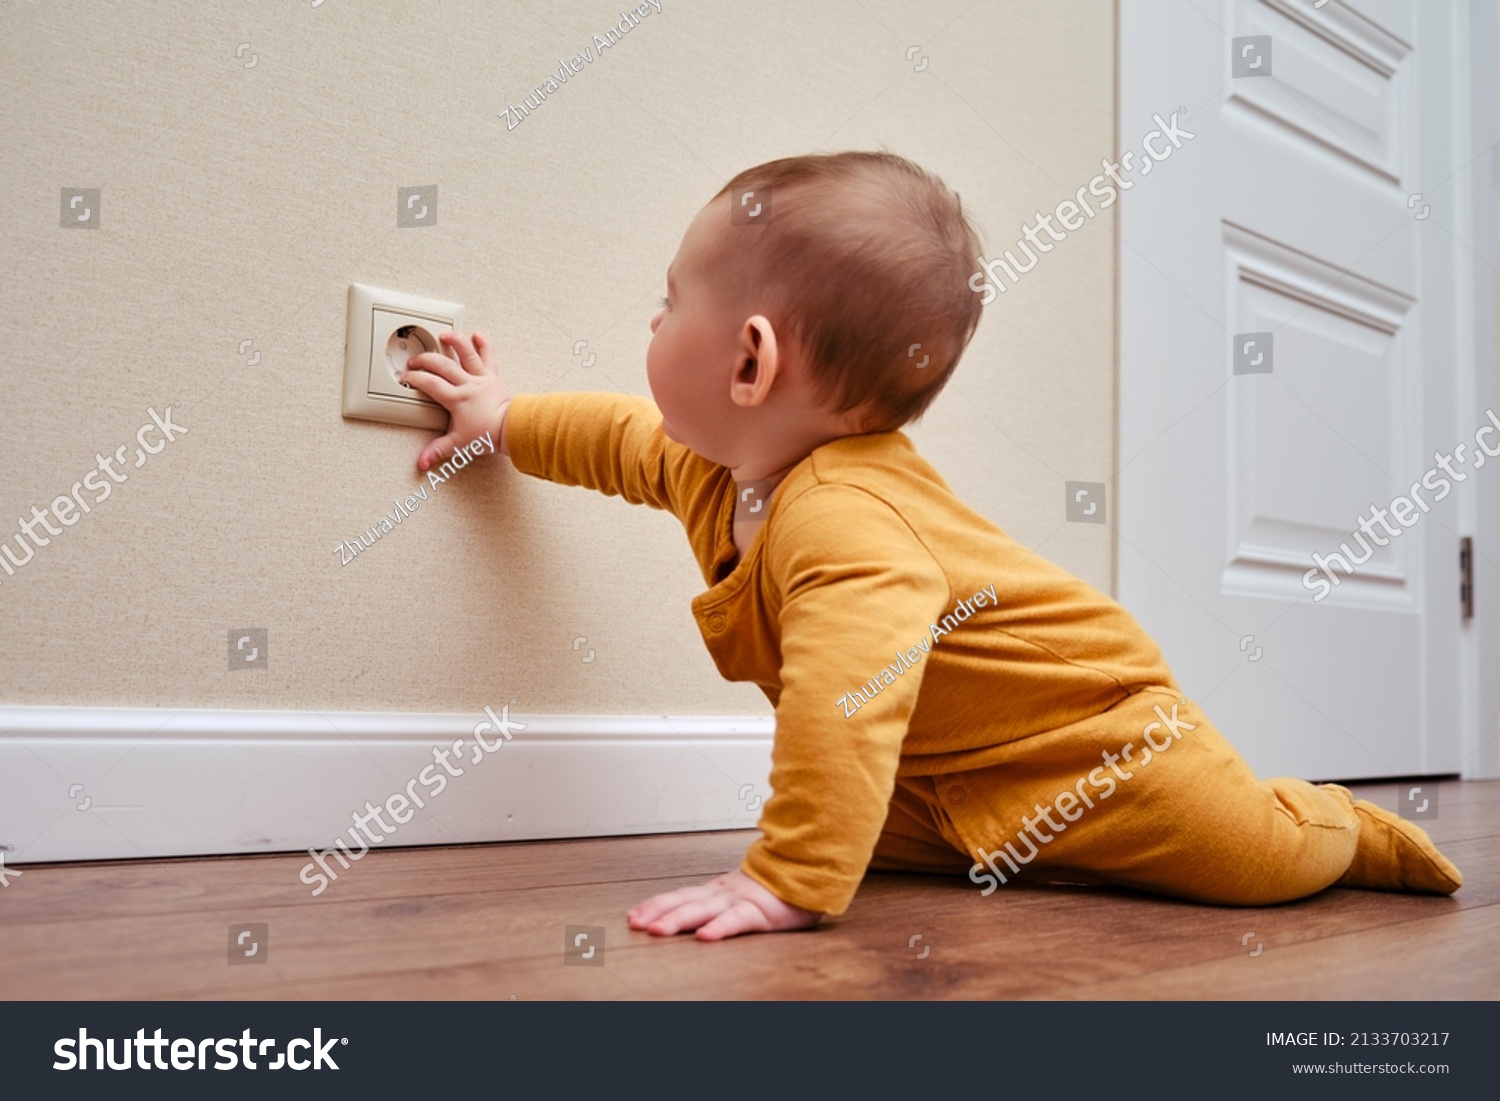 Baby toddler reaches into the electrical outlet on the home wall with his hand. Danger and protection of child fingers from electric shock, aged 6-11 months #2133703217